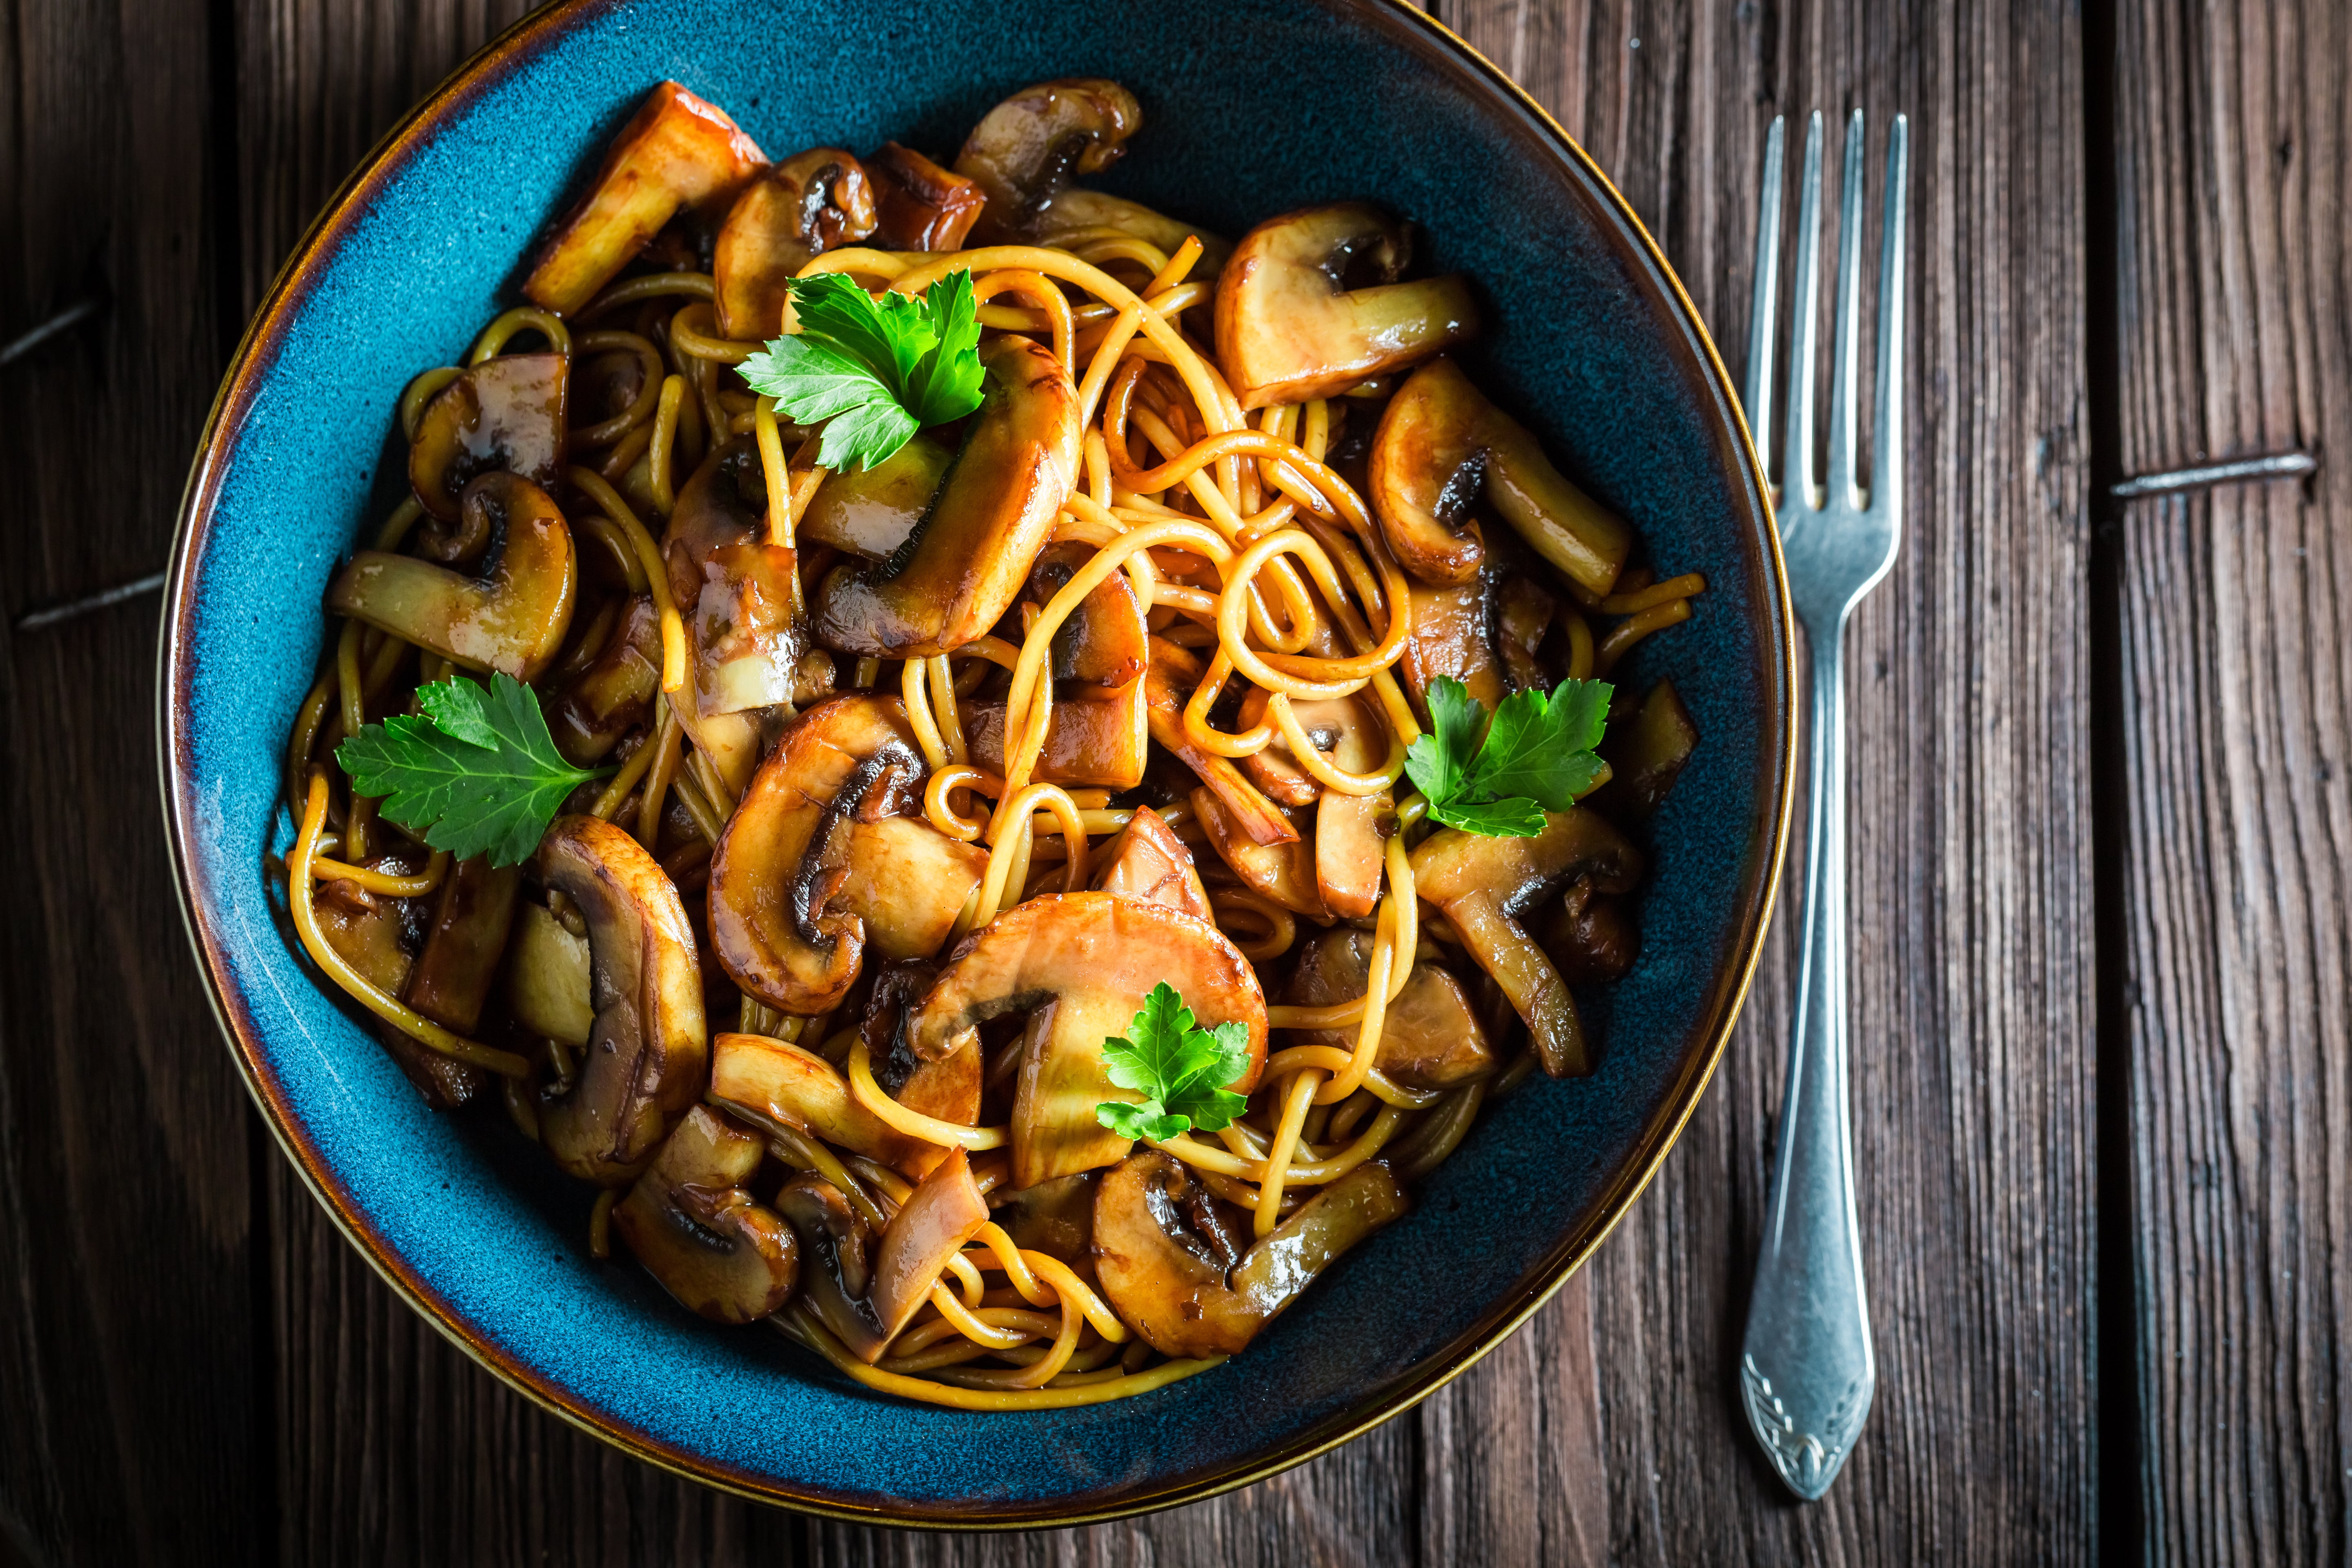 Chinese flavours transform a quick stir-fry into a flavourful, unconventional pasta dish